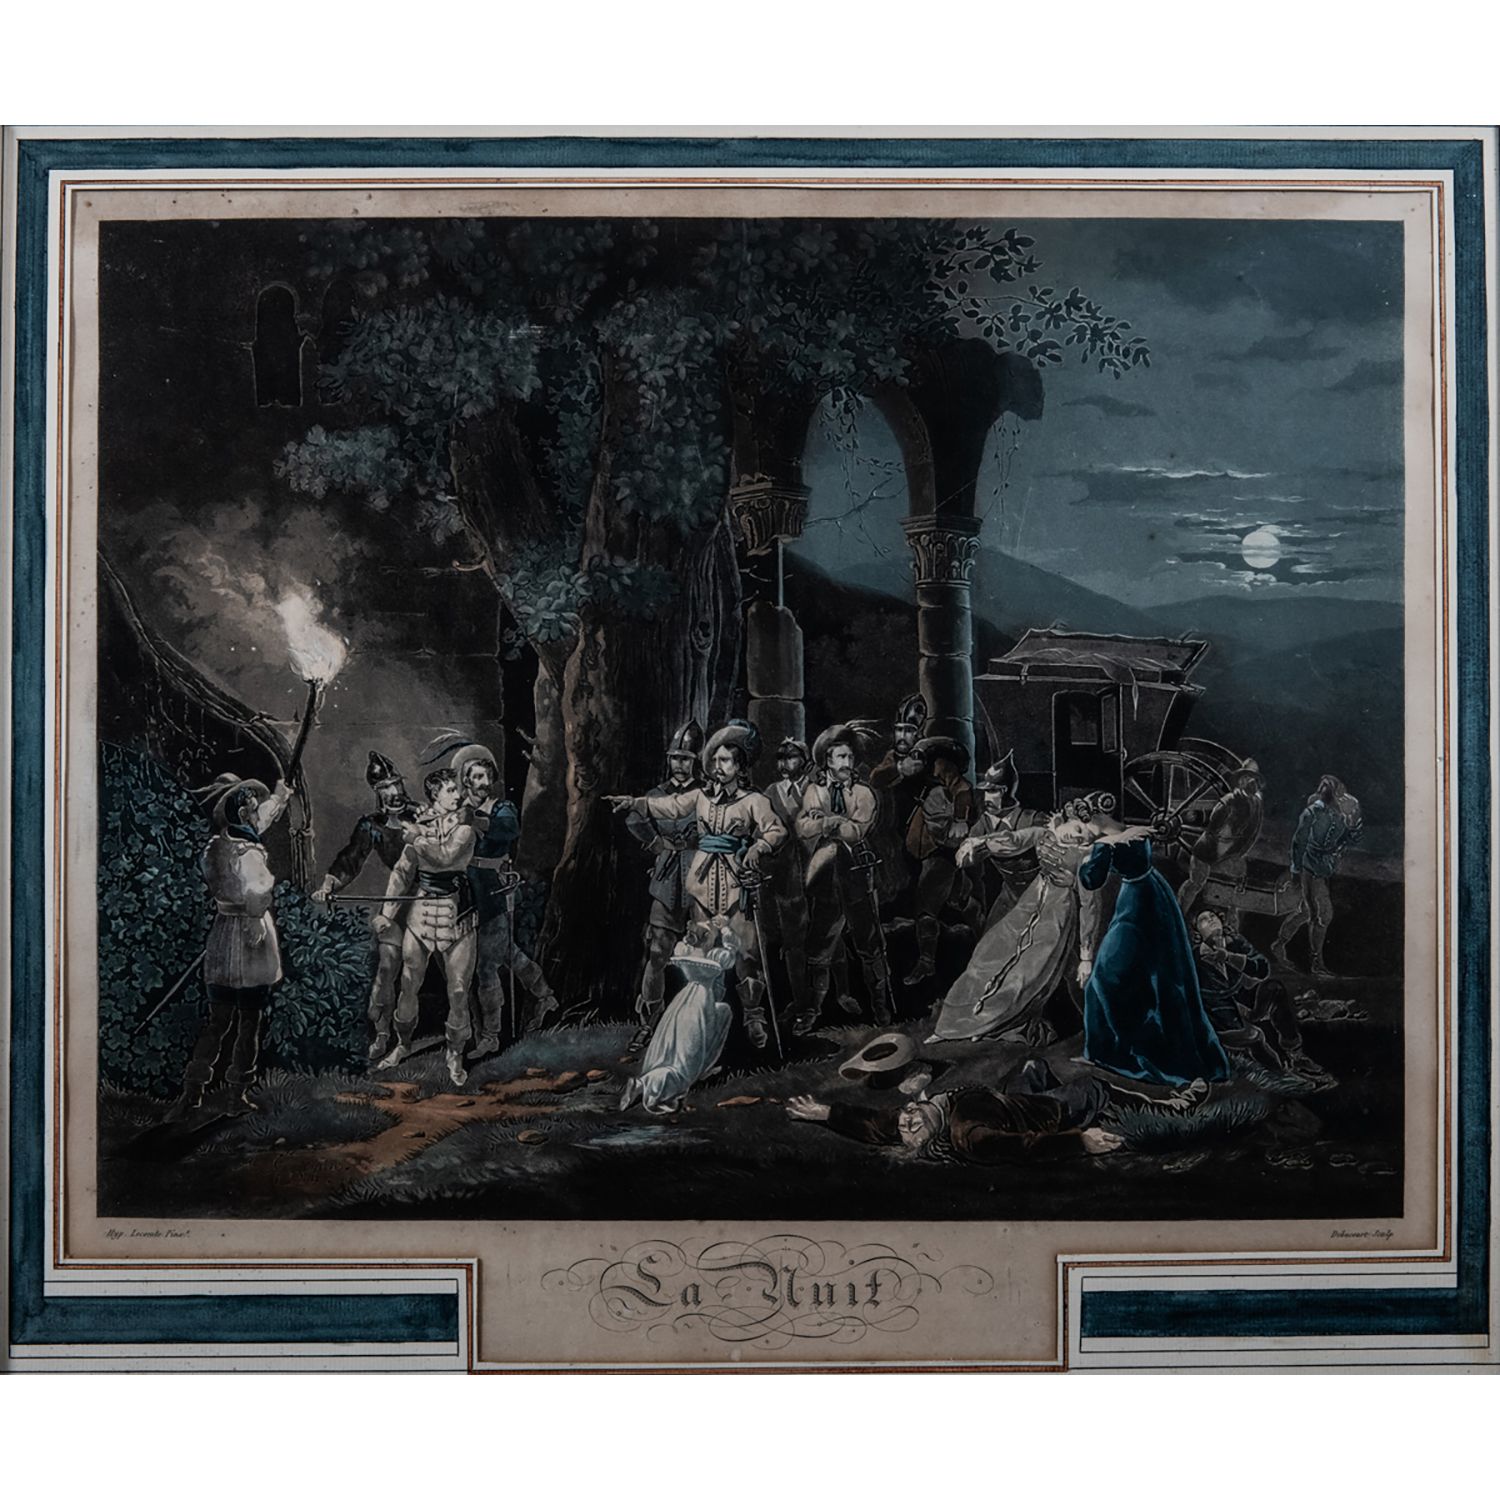 Null HIPPOLYTE LECOMTE (1781-1857)

THE NIGHT

Aquatint in colors on paper 

Aqu&hellip;